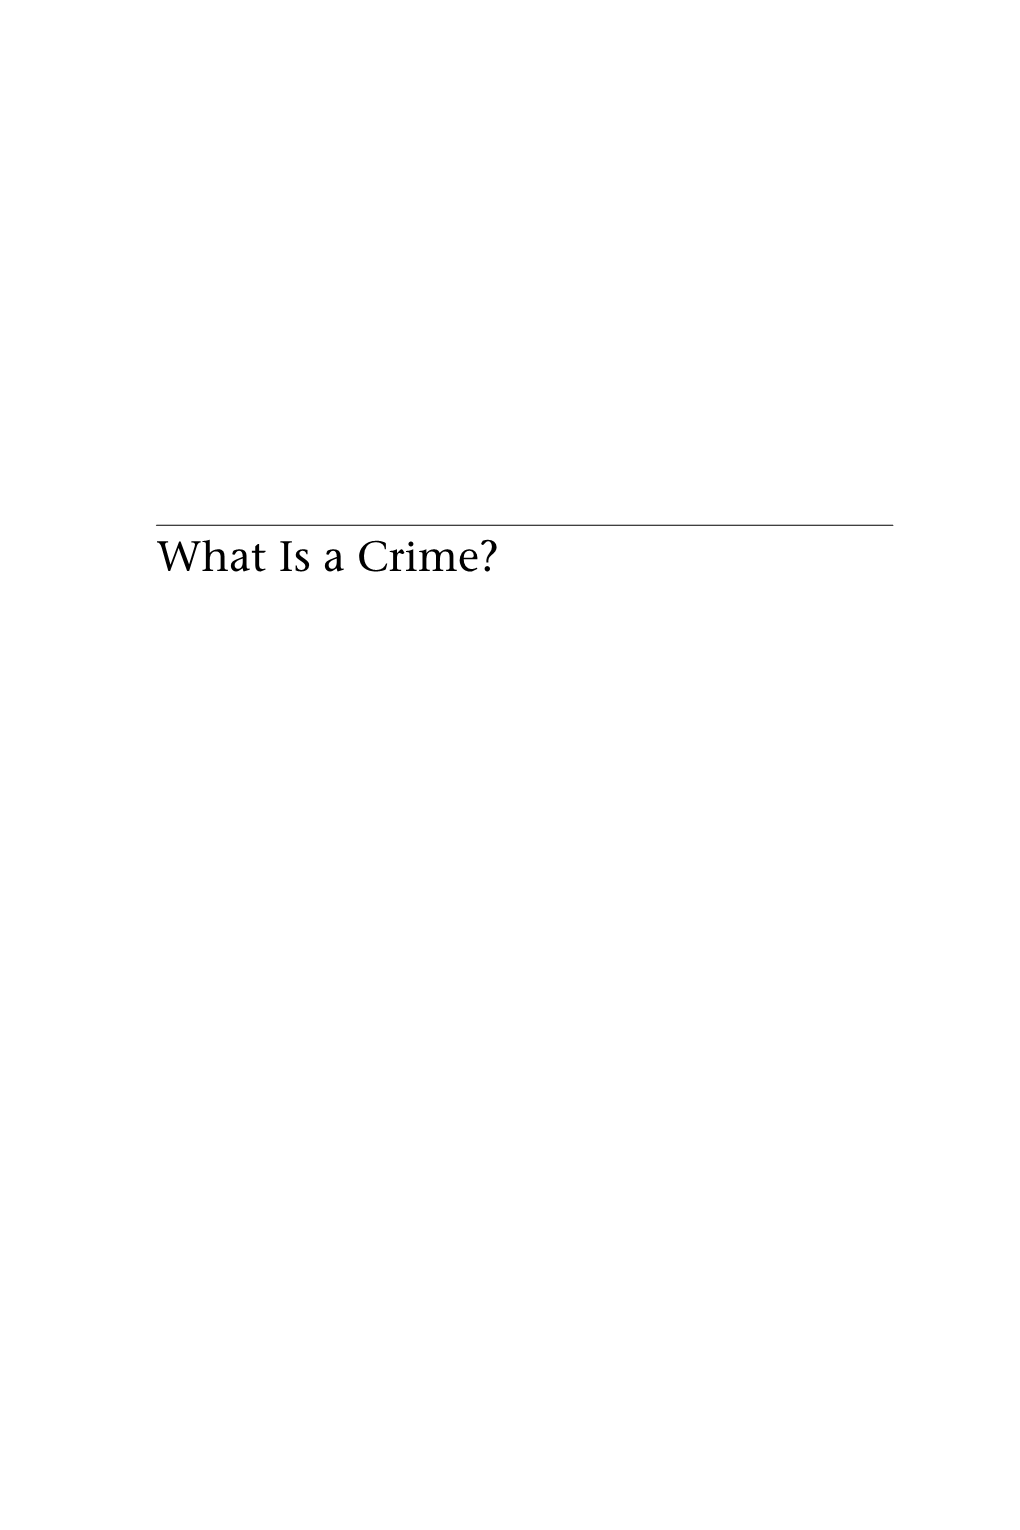 What Is a Crime?